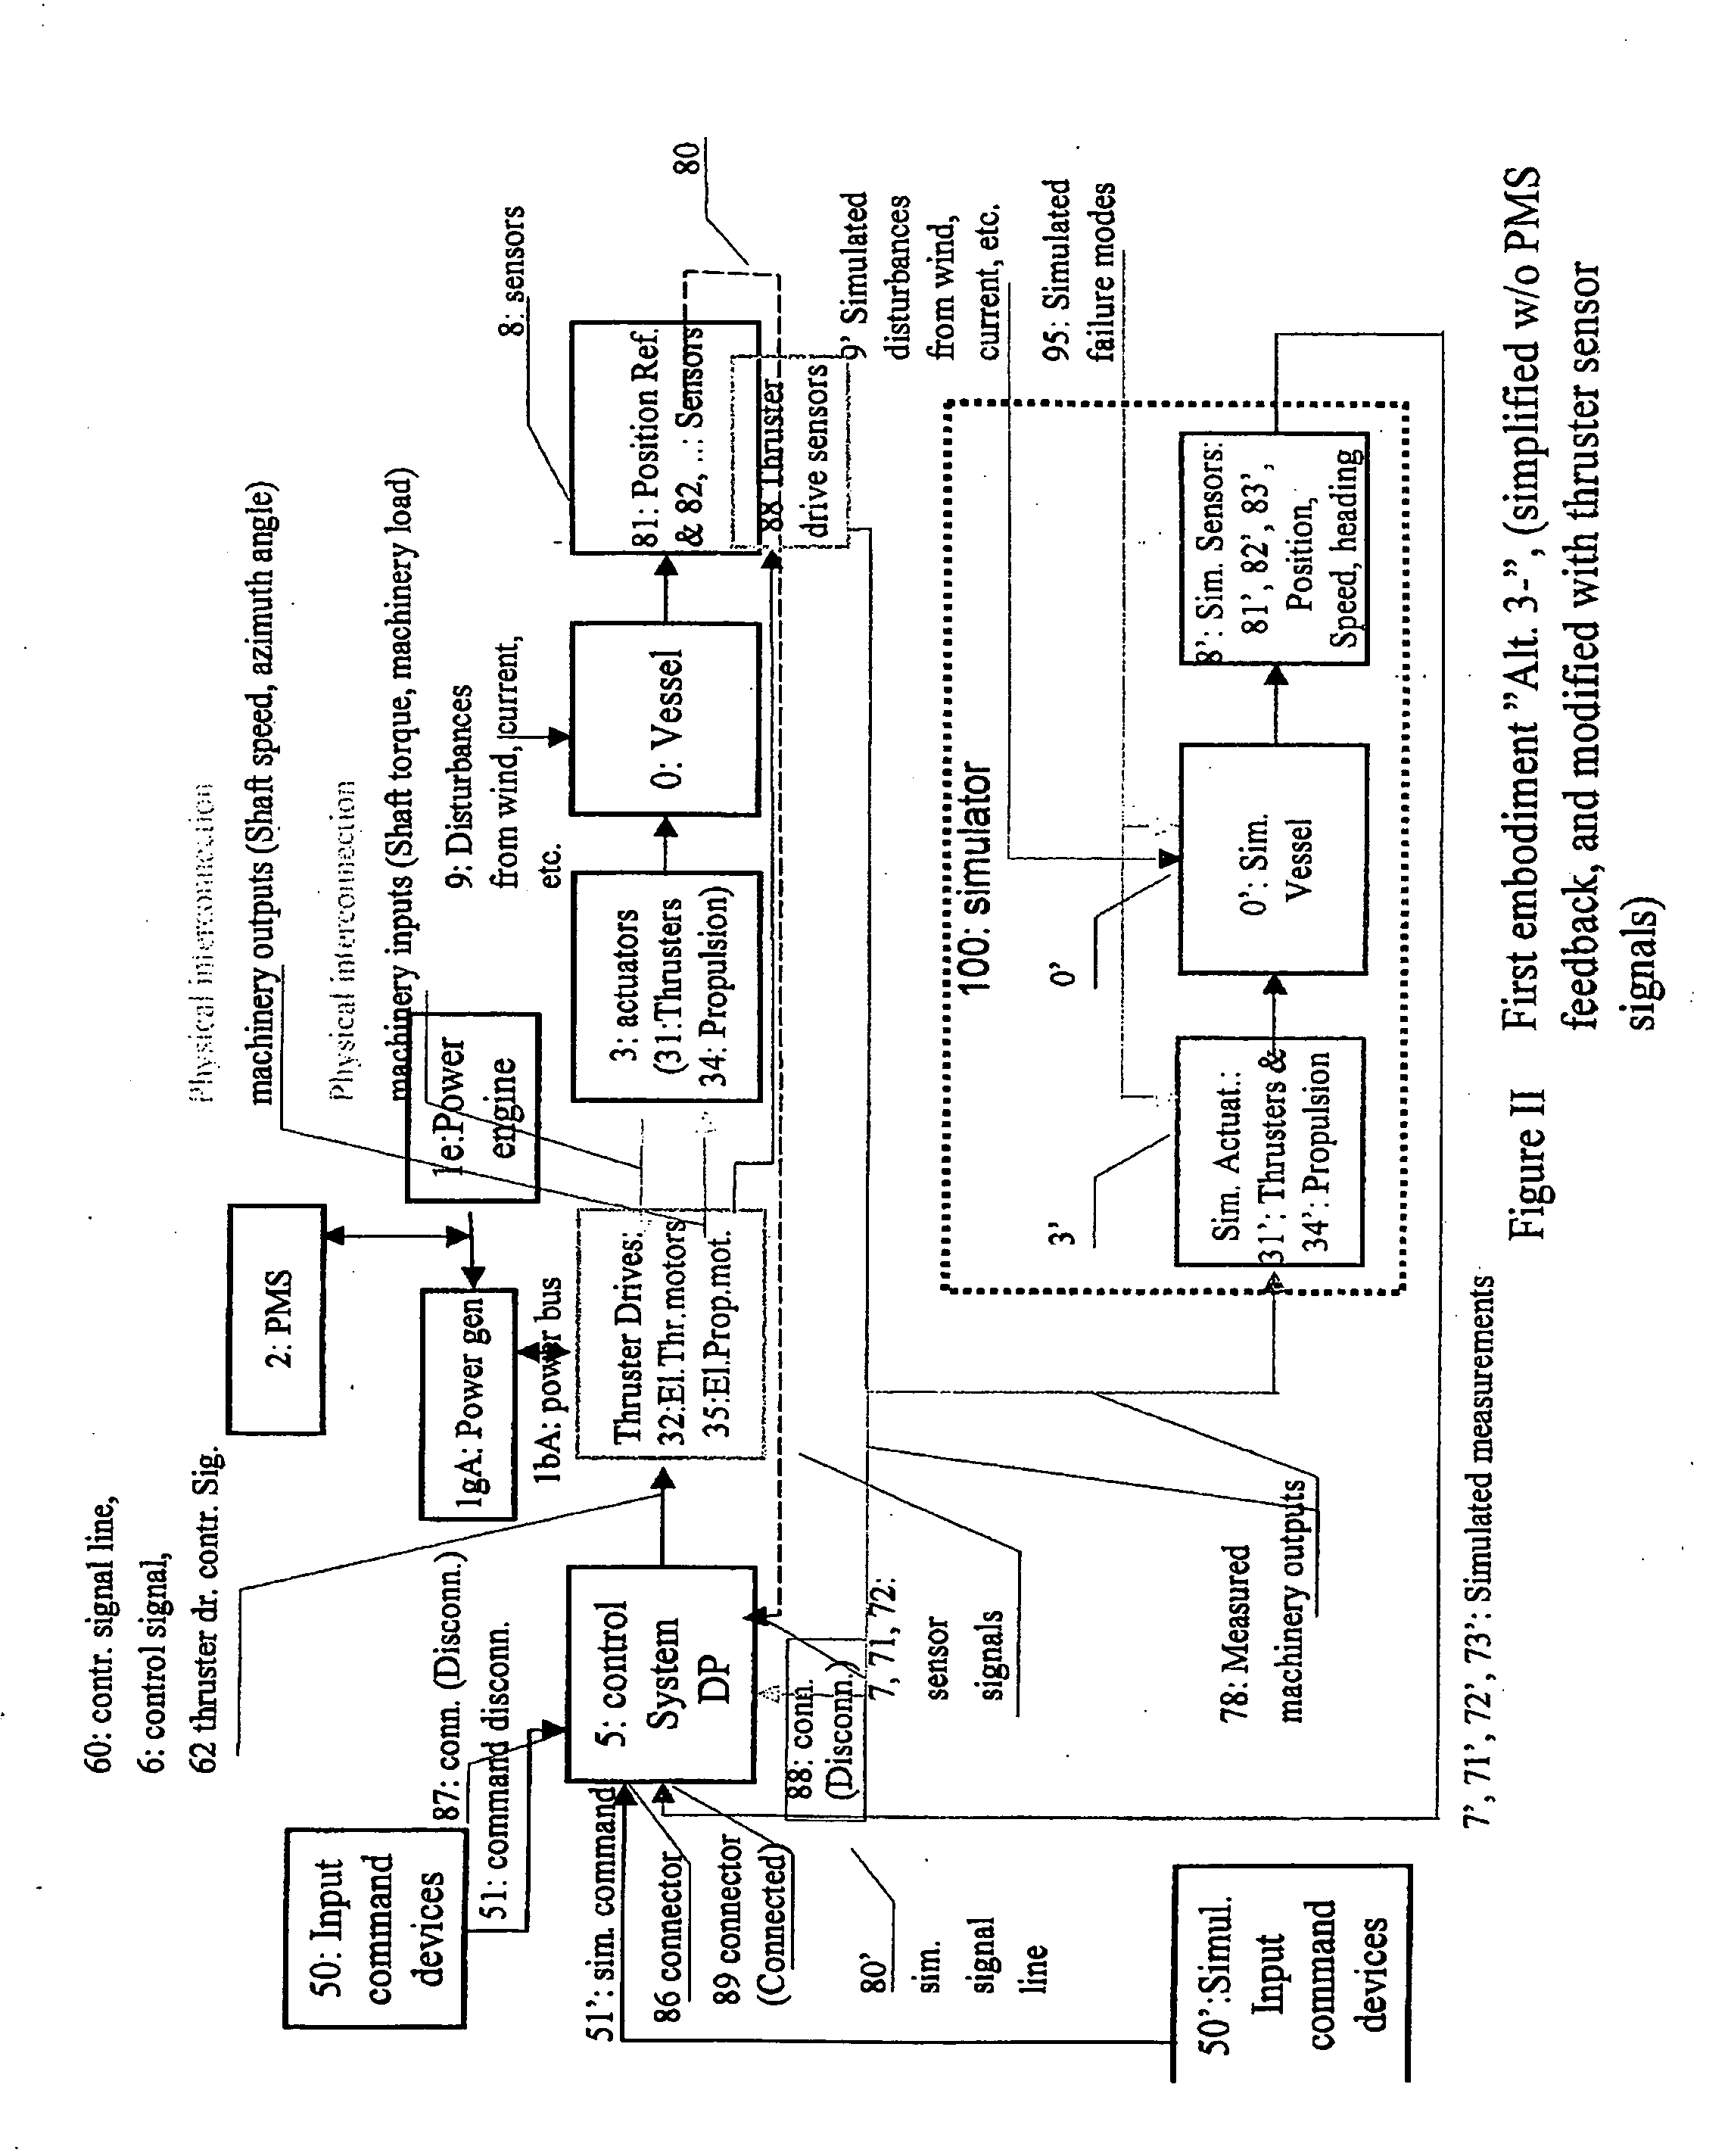 Method for testing of a combined dynamic positioning and power management system